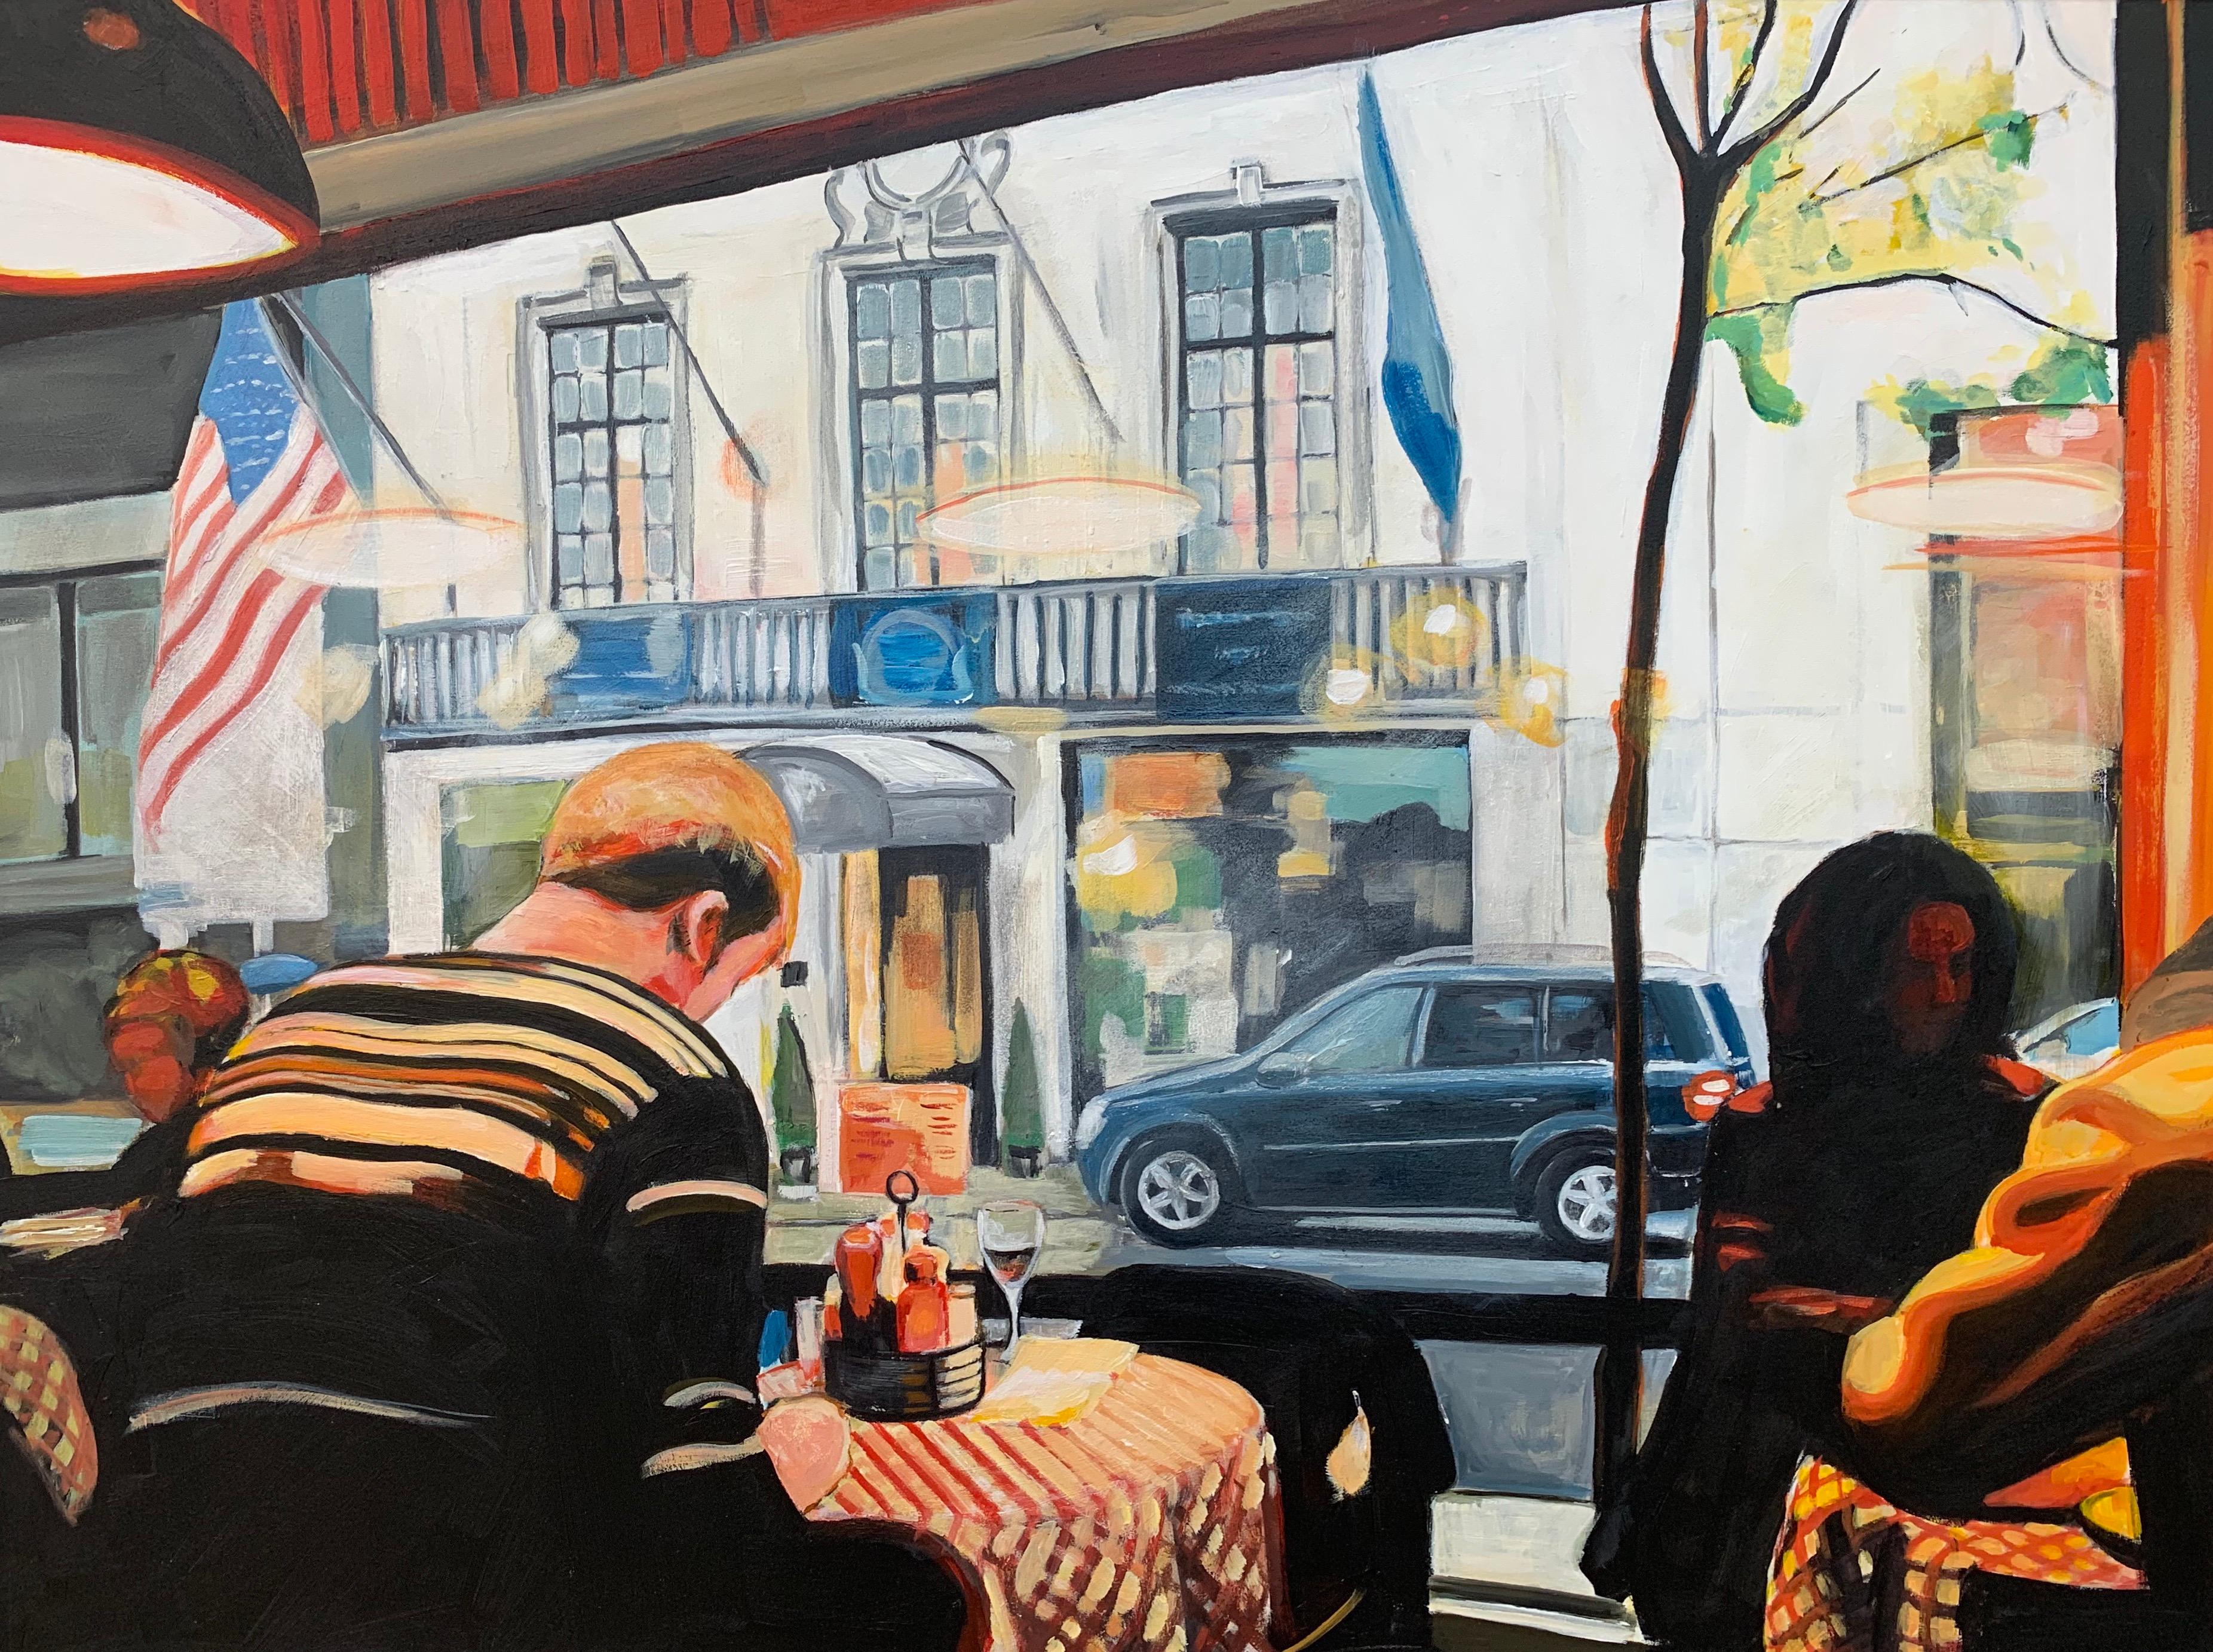 Still Life Painting of American Diner Interior New York City by British Artist - Beige Still-Life Painting by Angela Wakefield